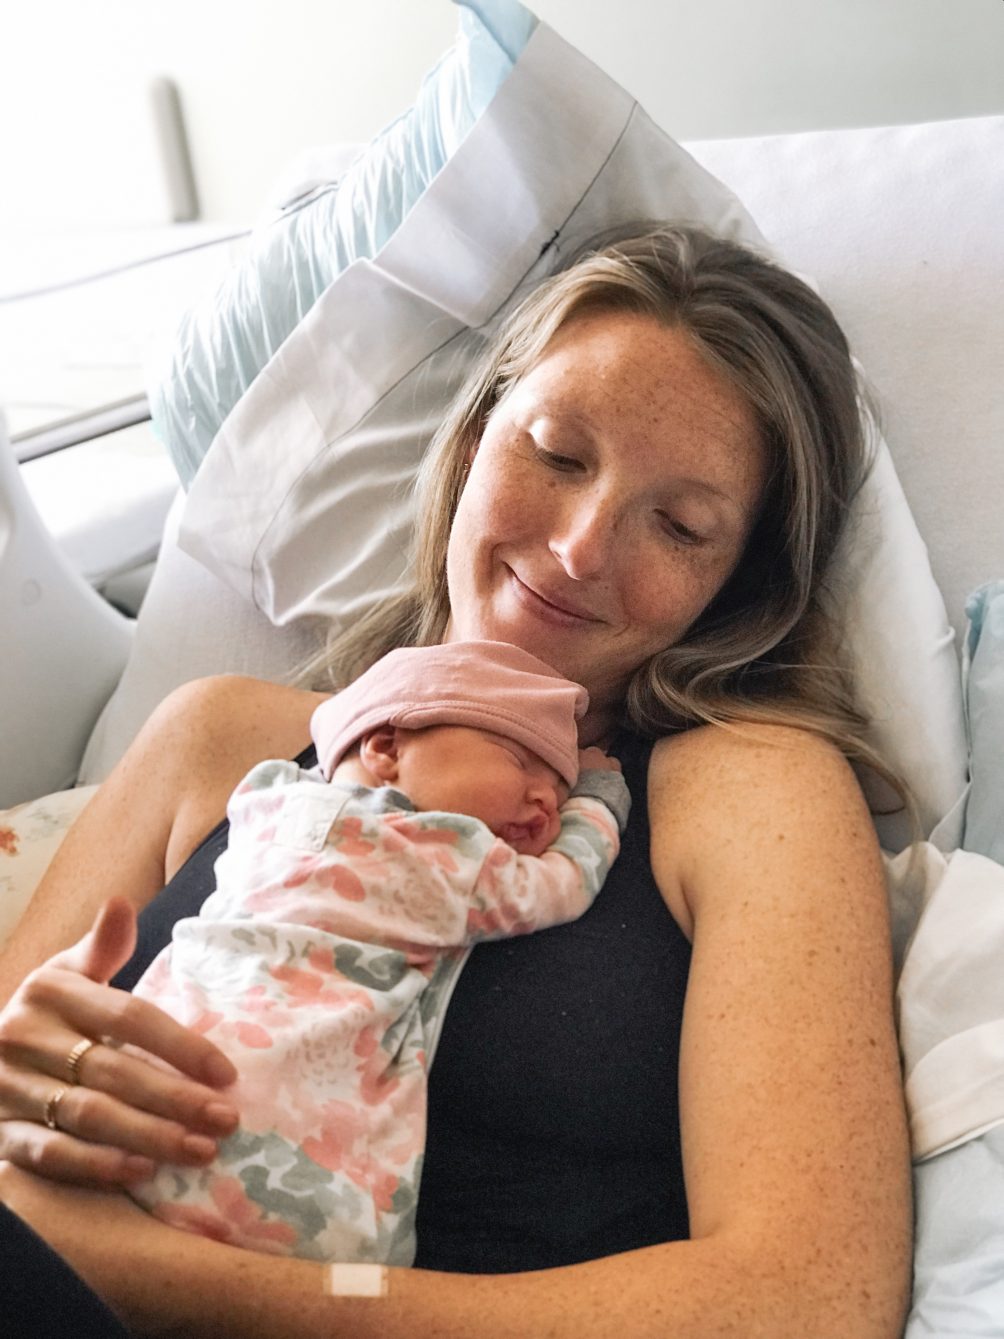 the birth story of our baby girl, Amelie Ingrid